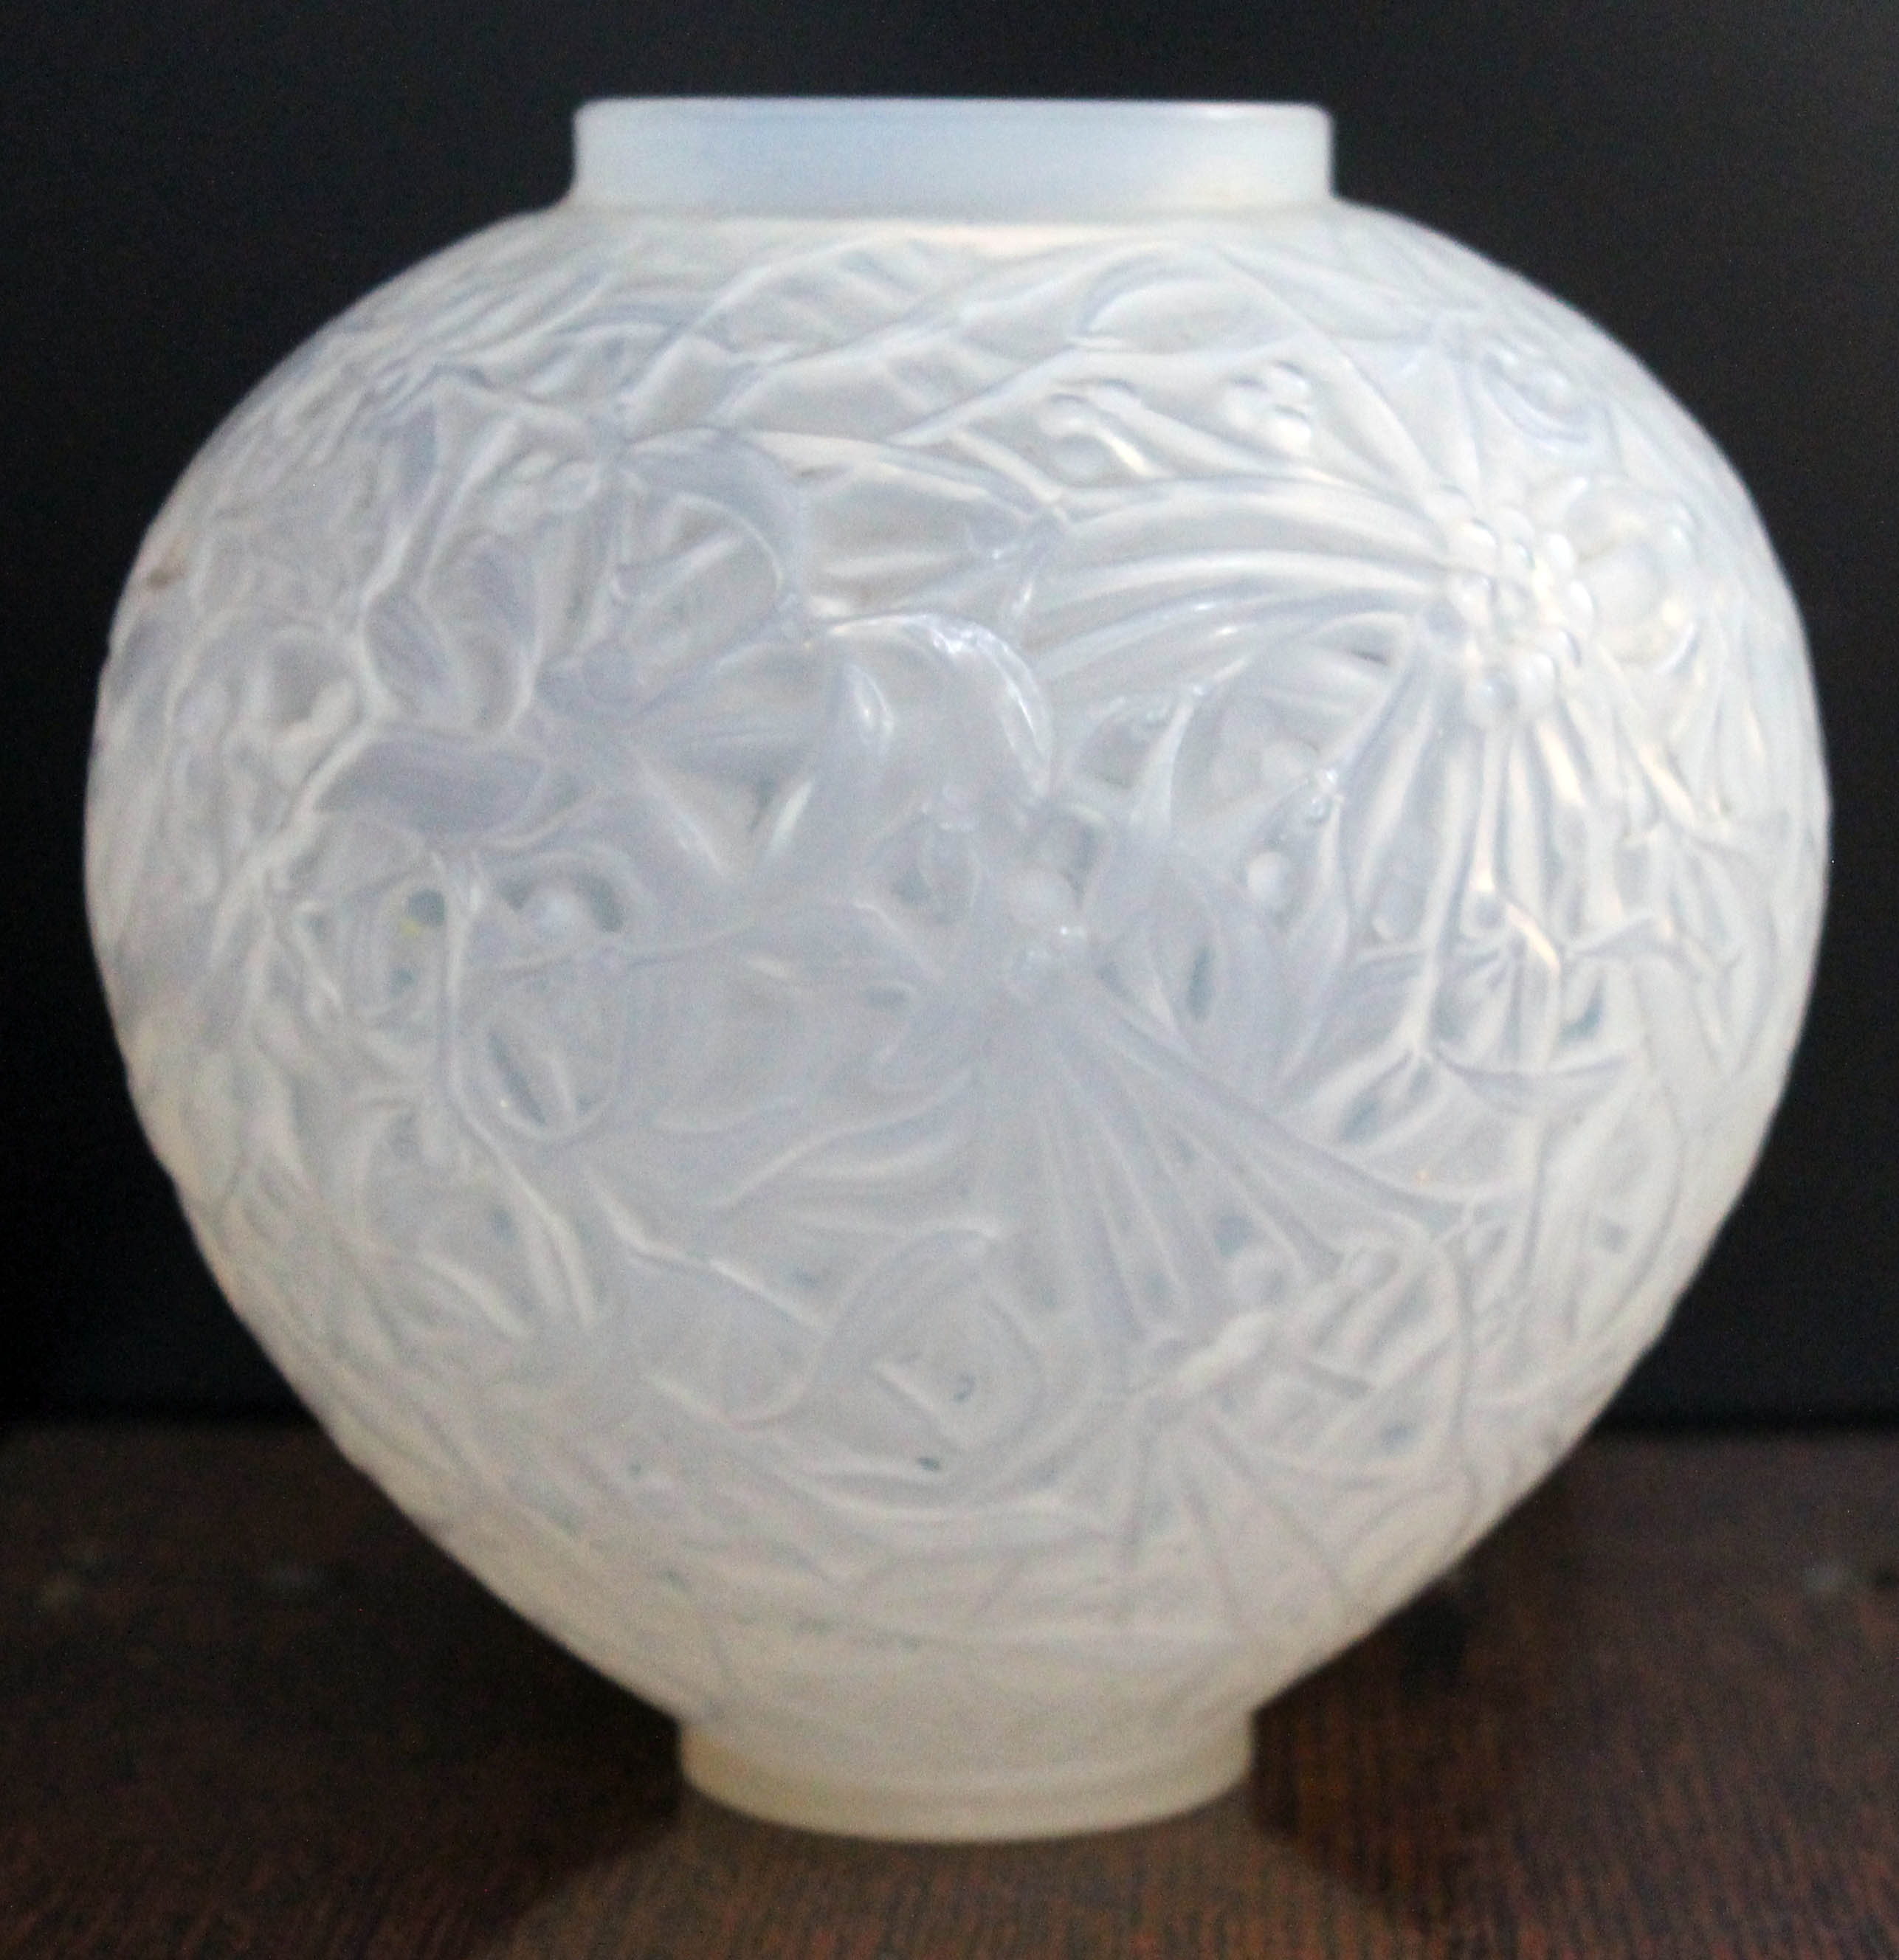 A Lalique Gui vase, etched 'R. Lalique France No. 948', height 16.5cm. Condition - chip to foot